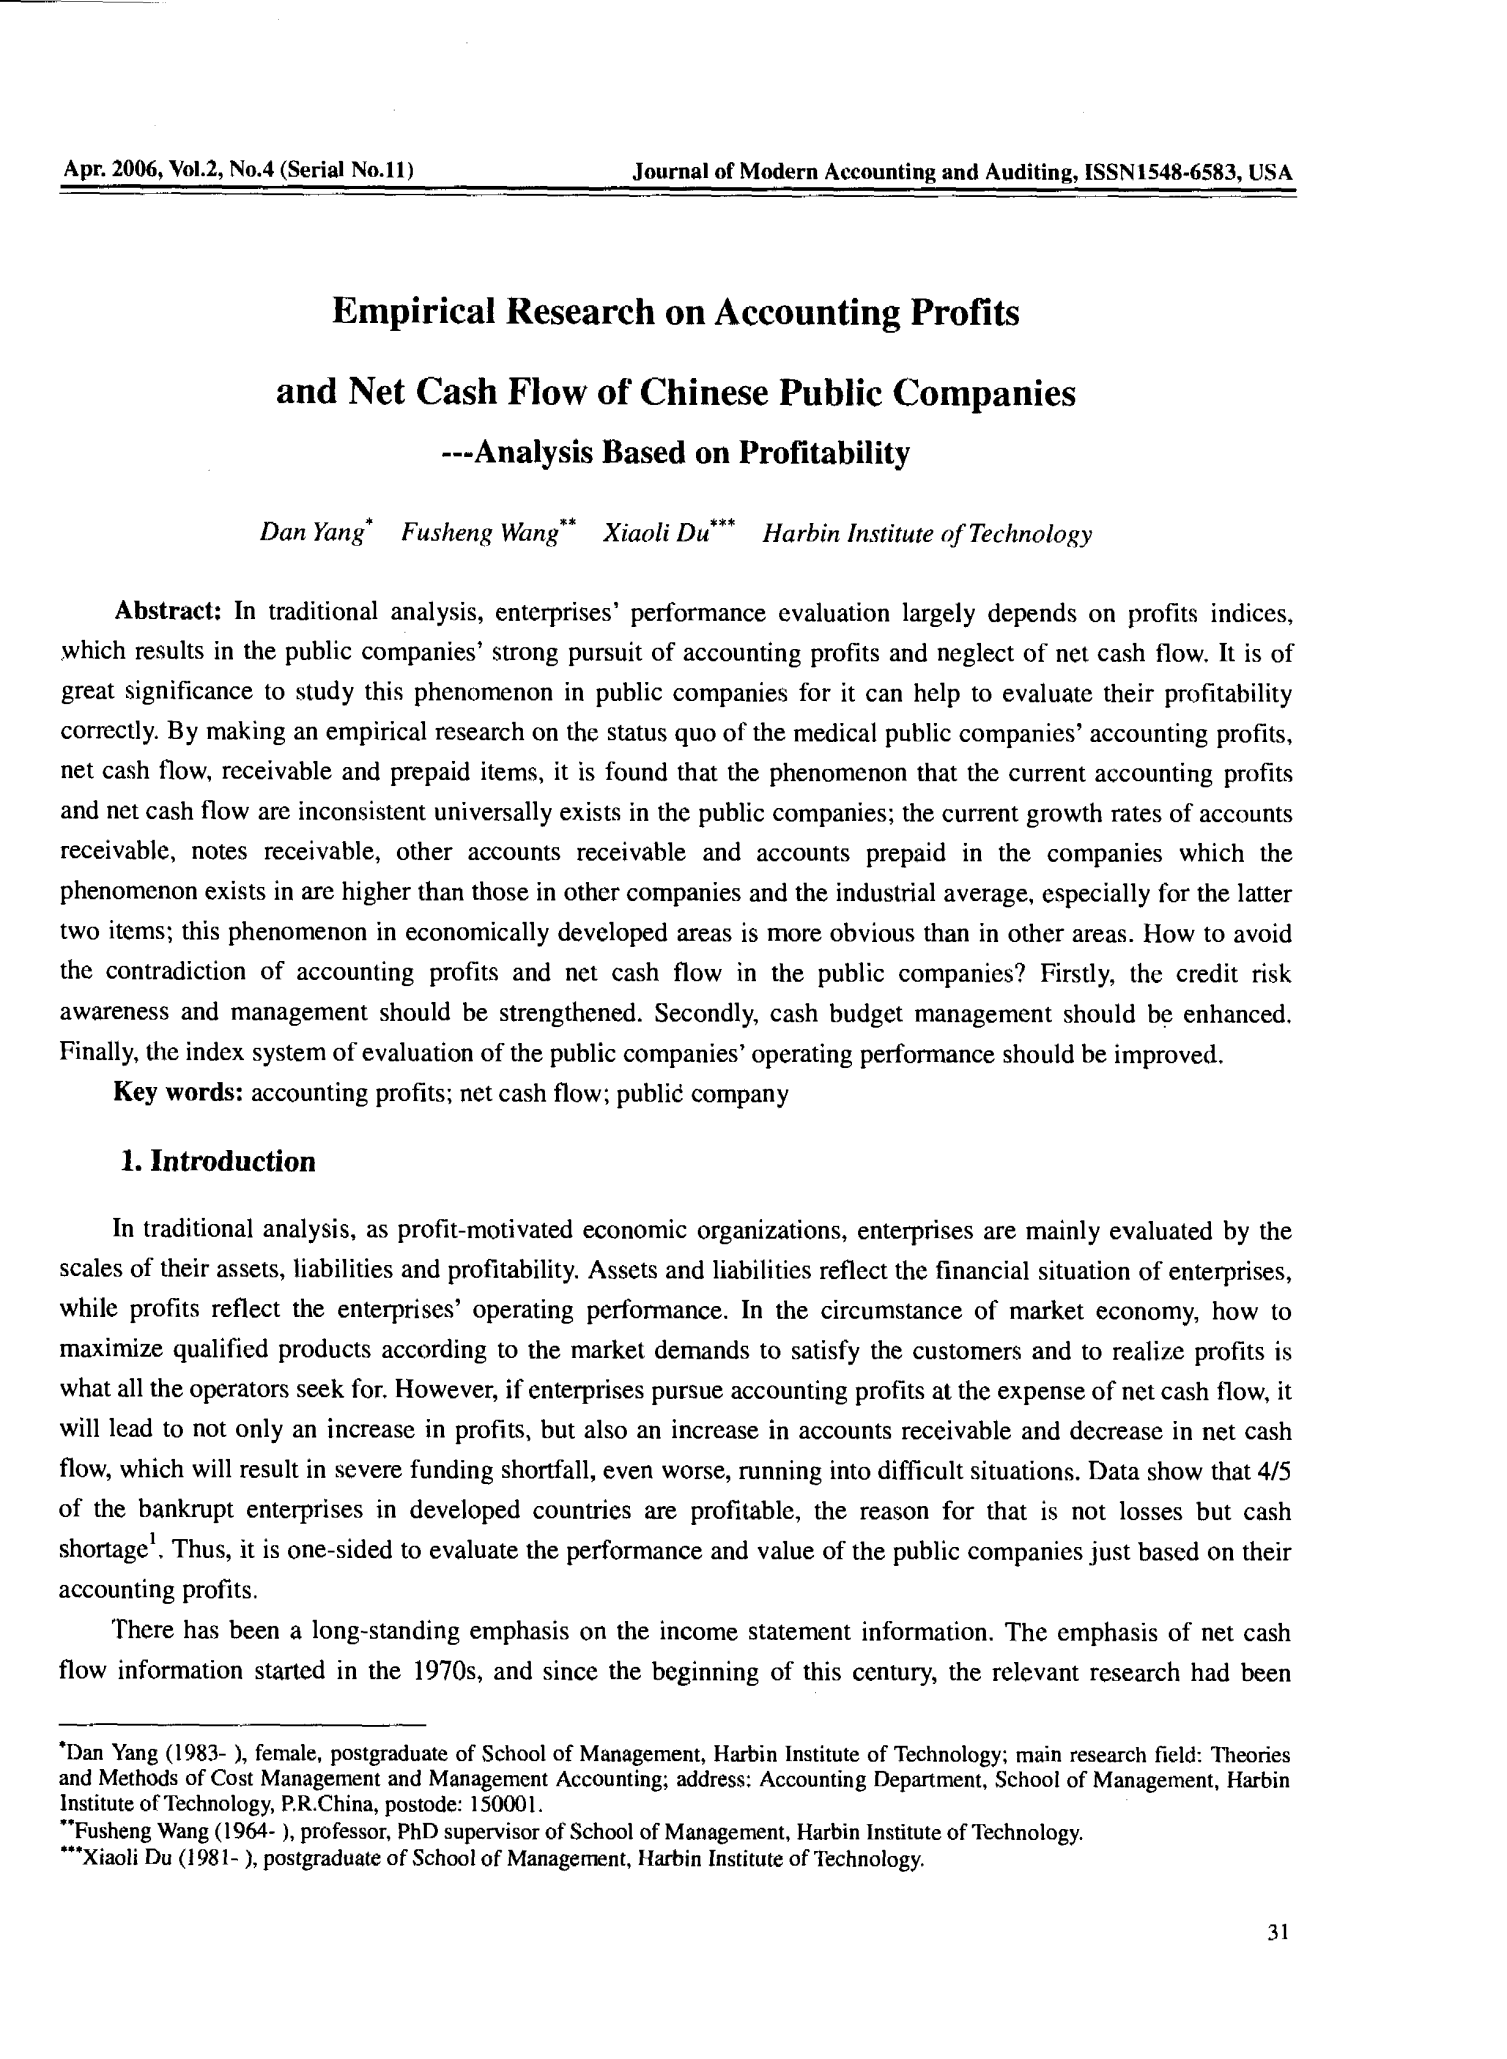 Empirical Research on Accounting Profits and Net Cash Flow of Chinese Public Companies ——Analysis